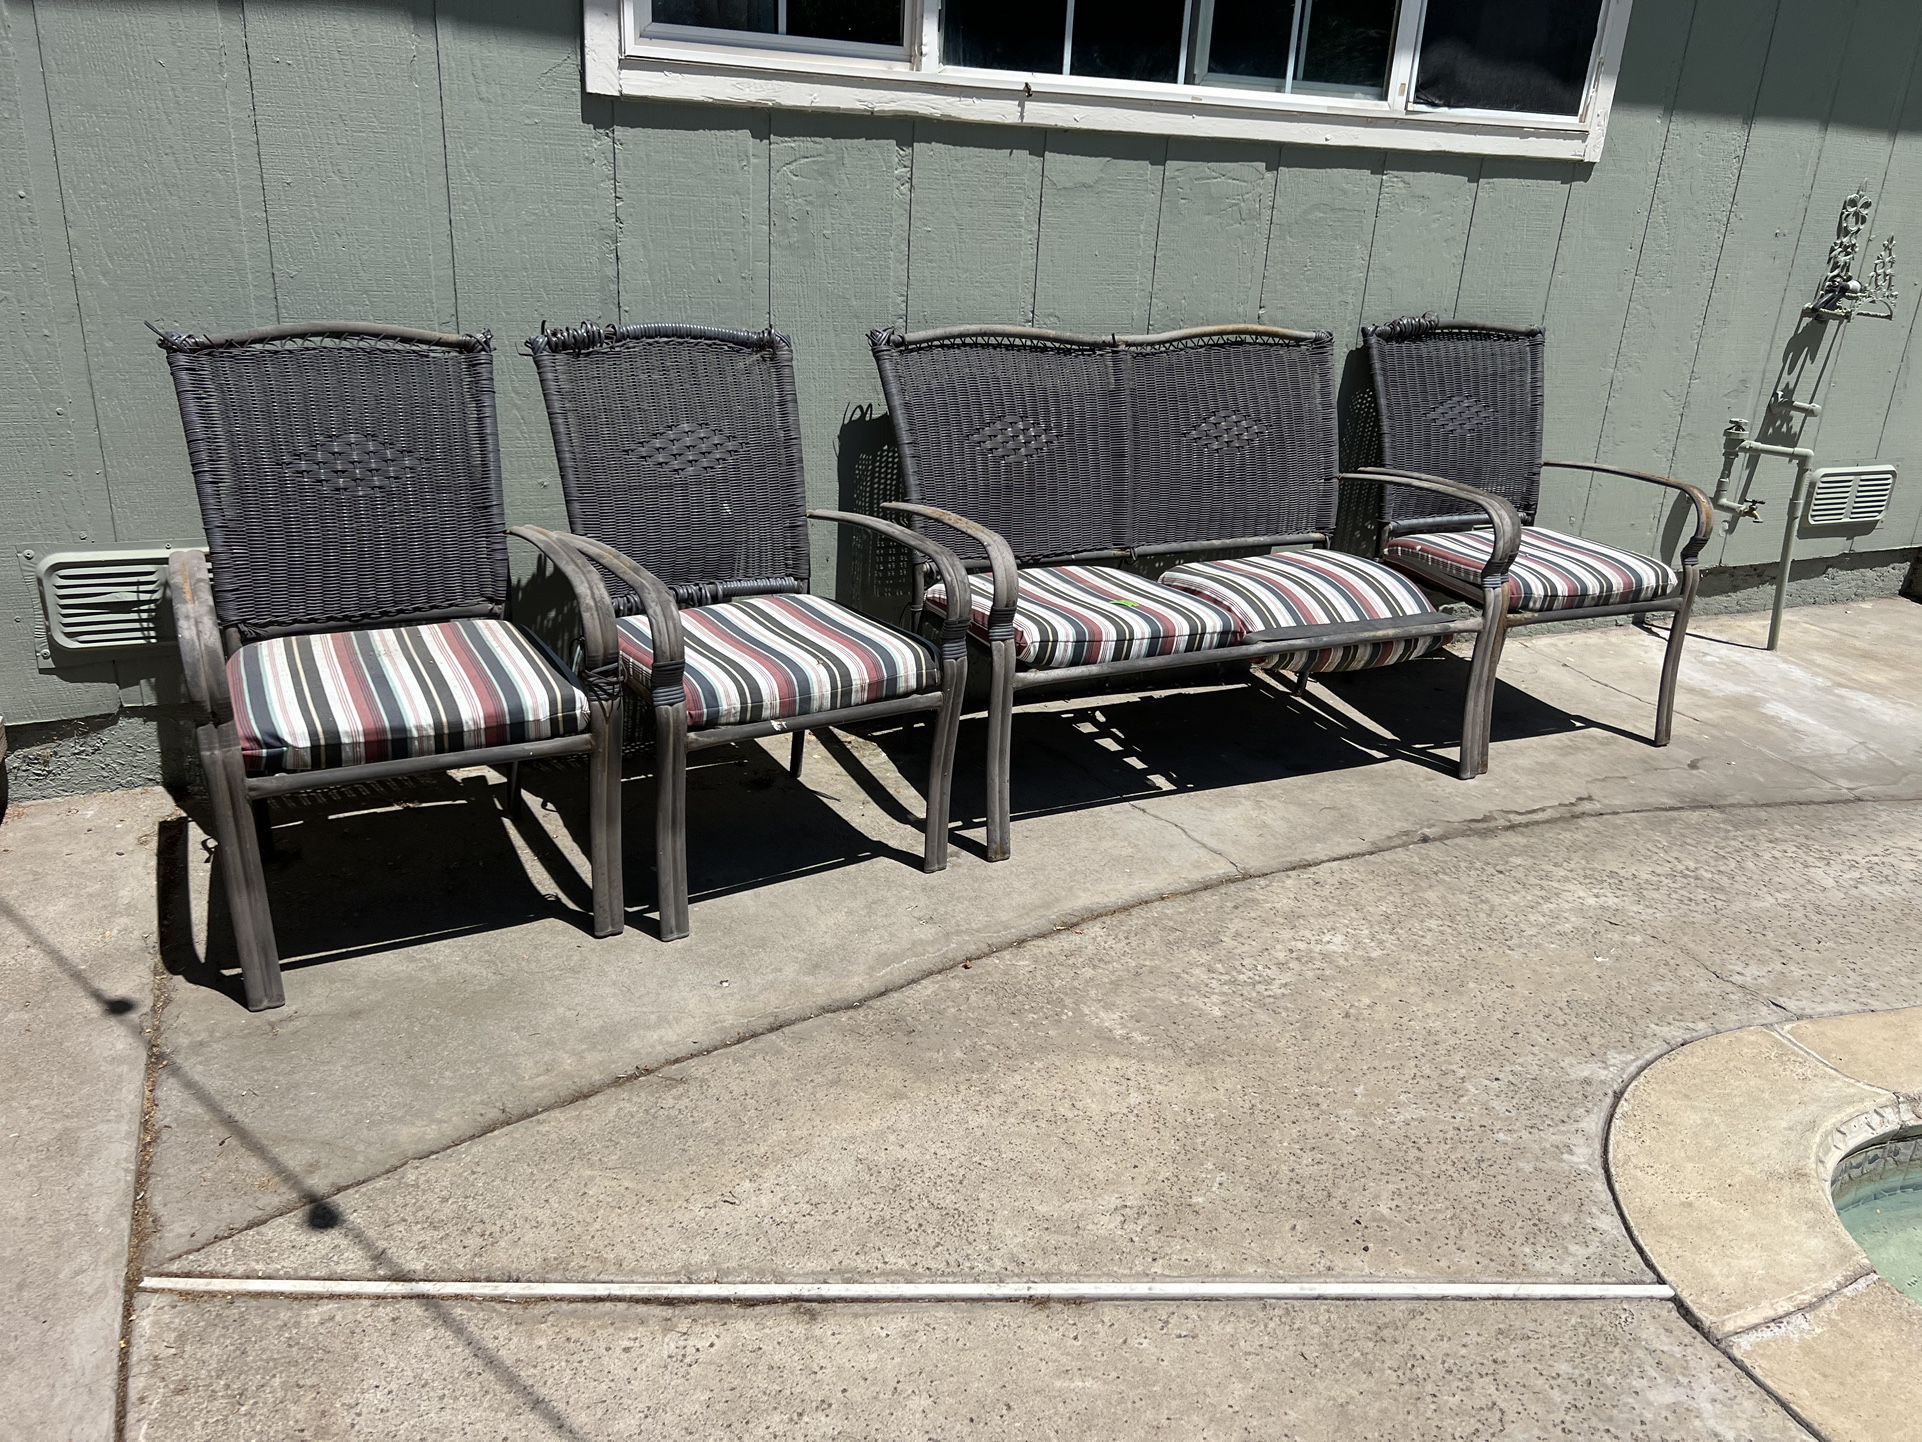 Outdoor Patio Chairs